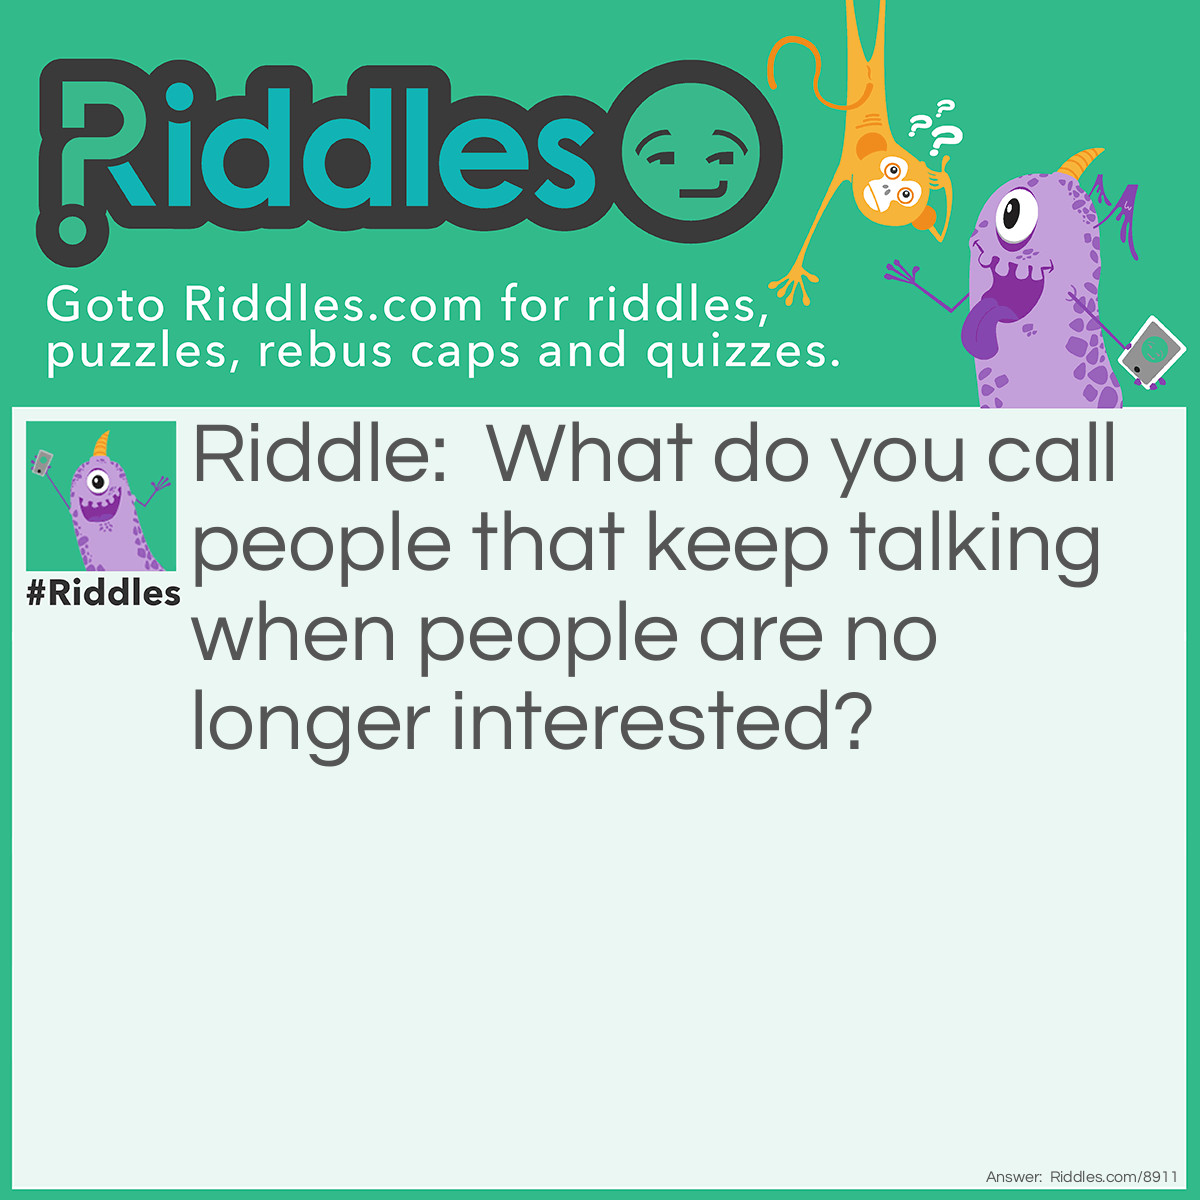 Riddle: What do you call people that keep talking when people are no longer interested? Answer: Teachers.